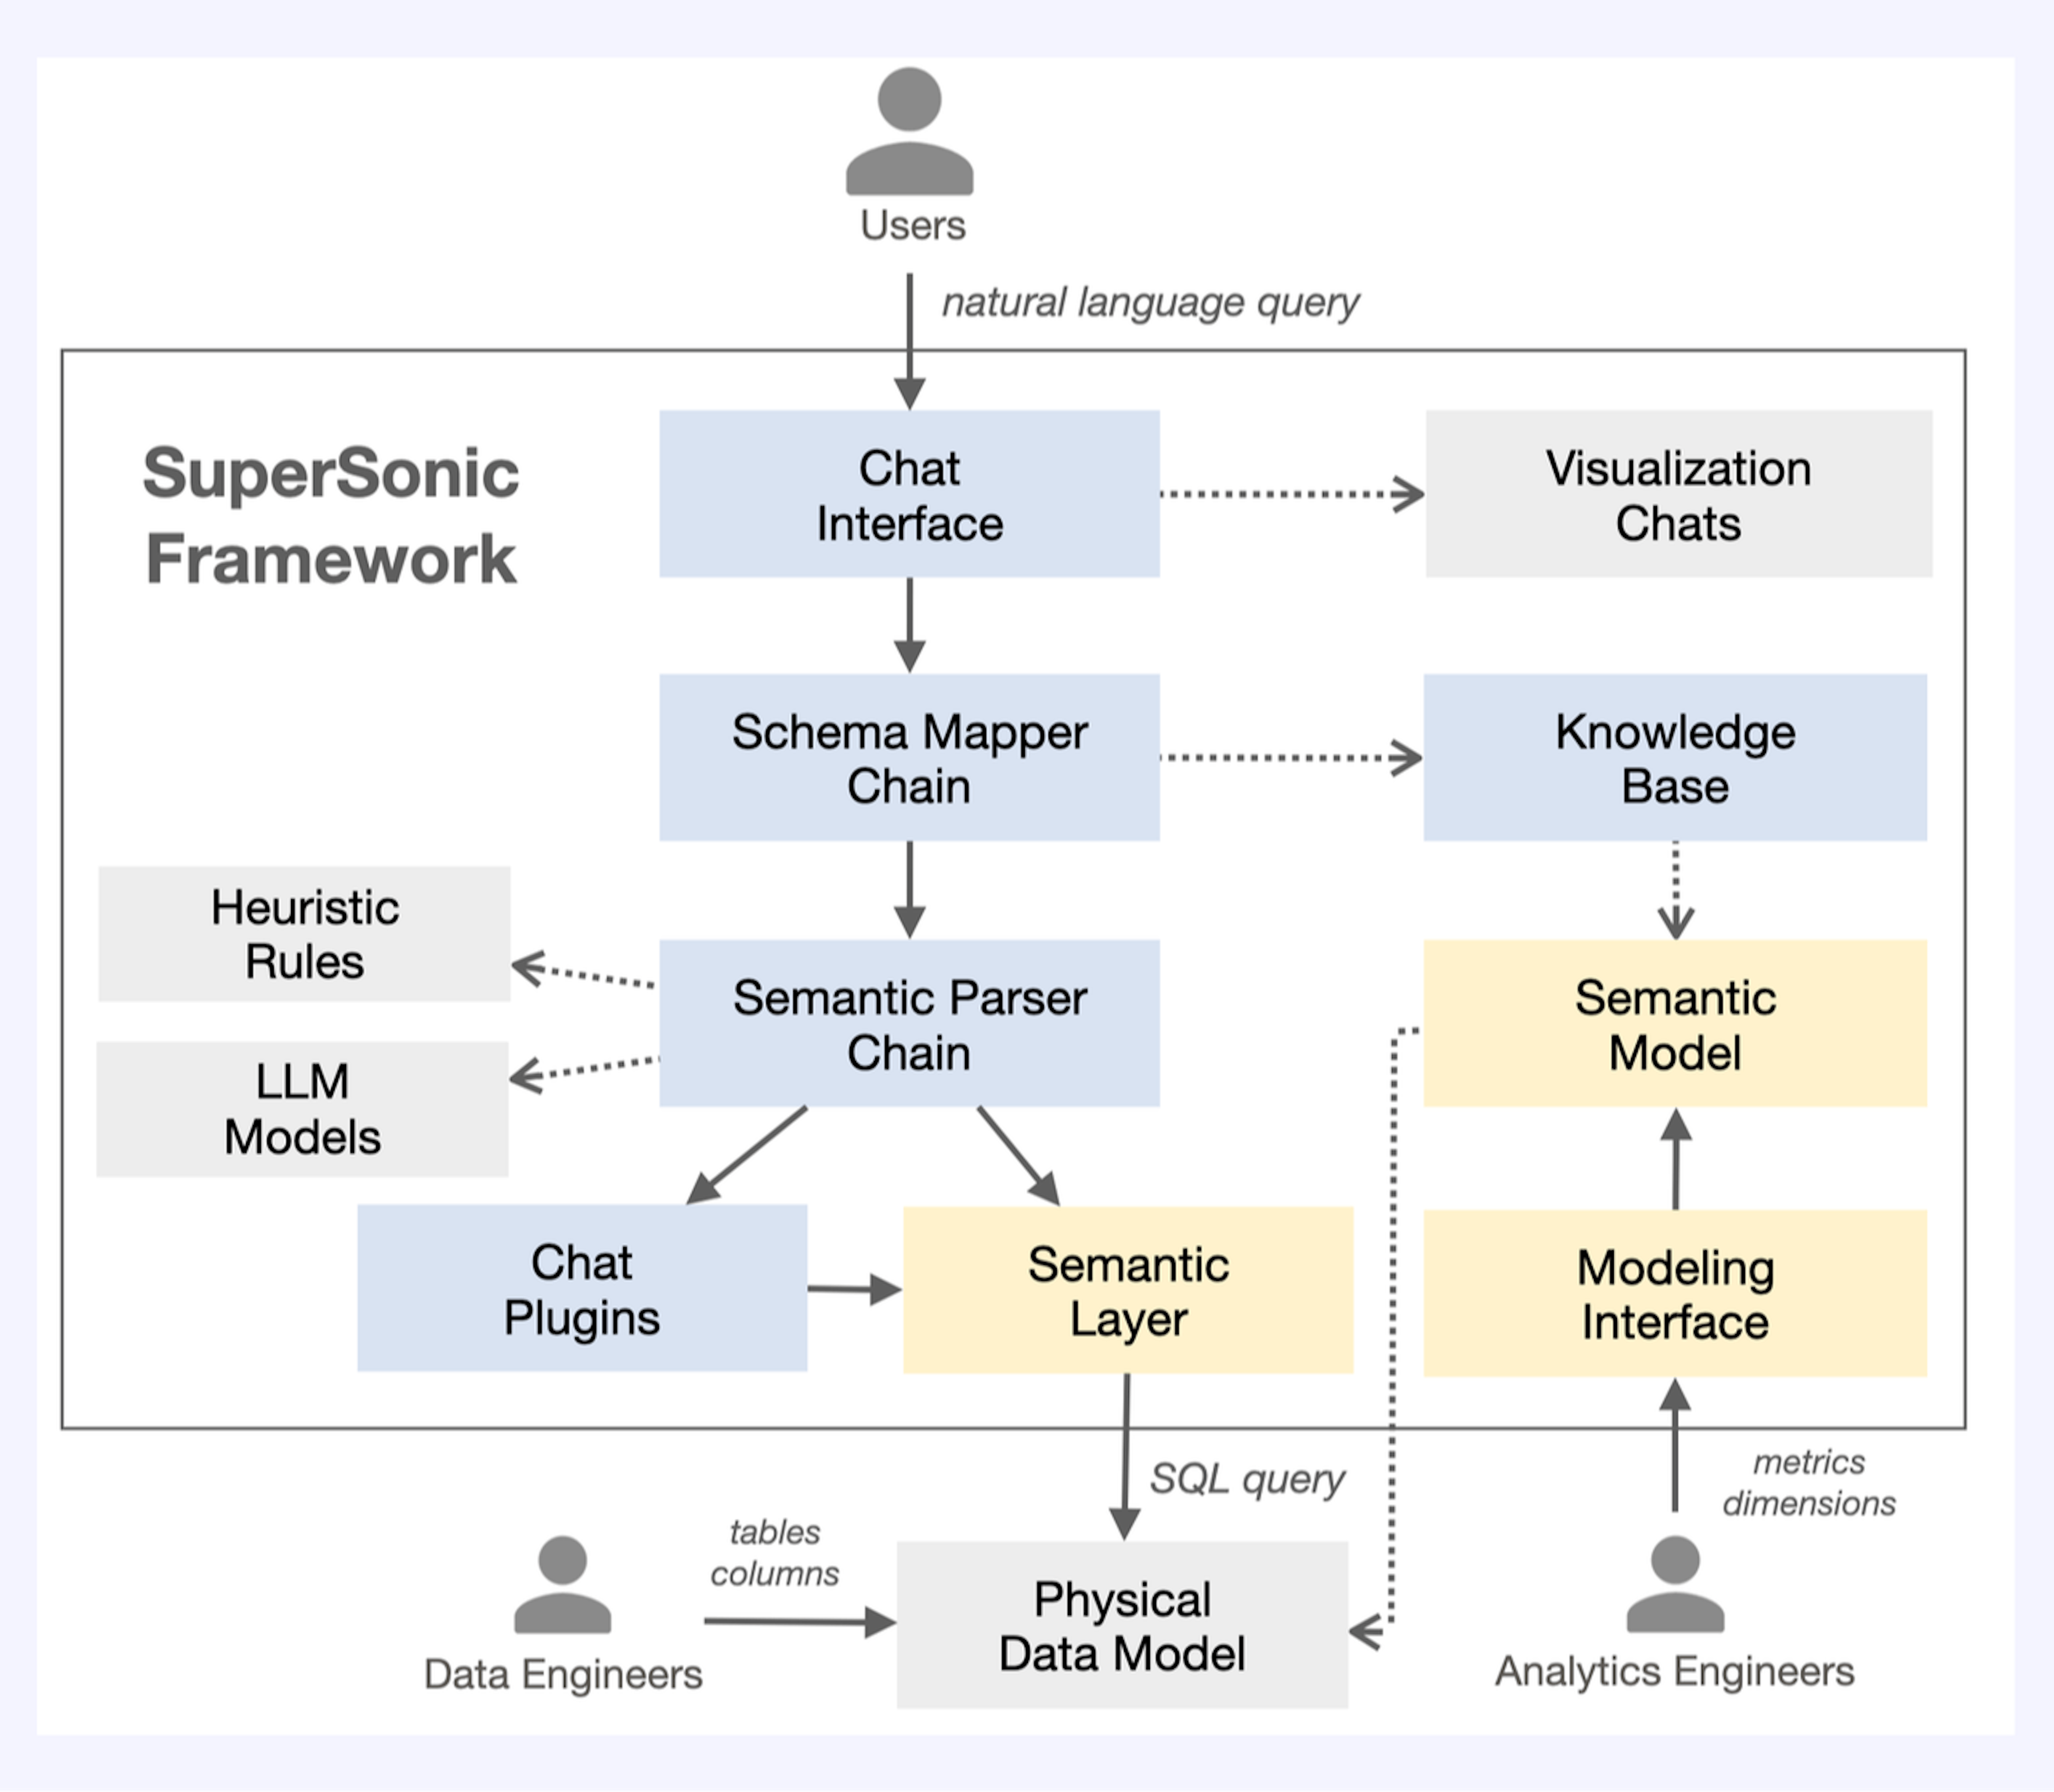 The SuperSonic framework